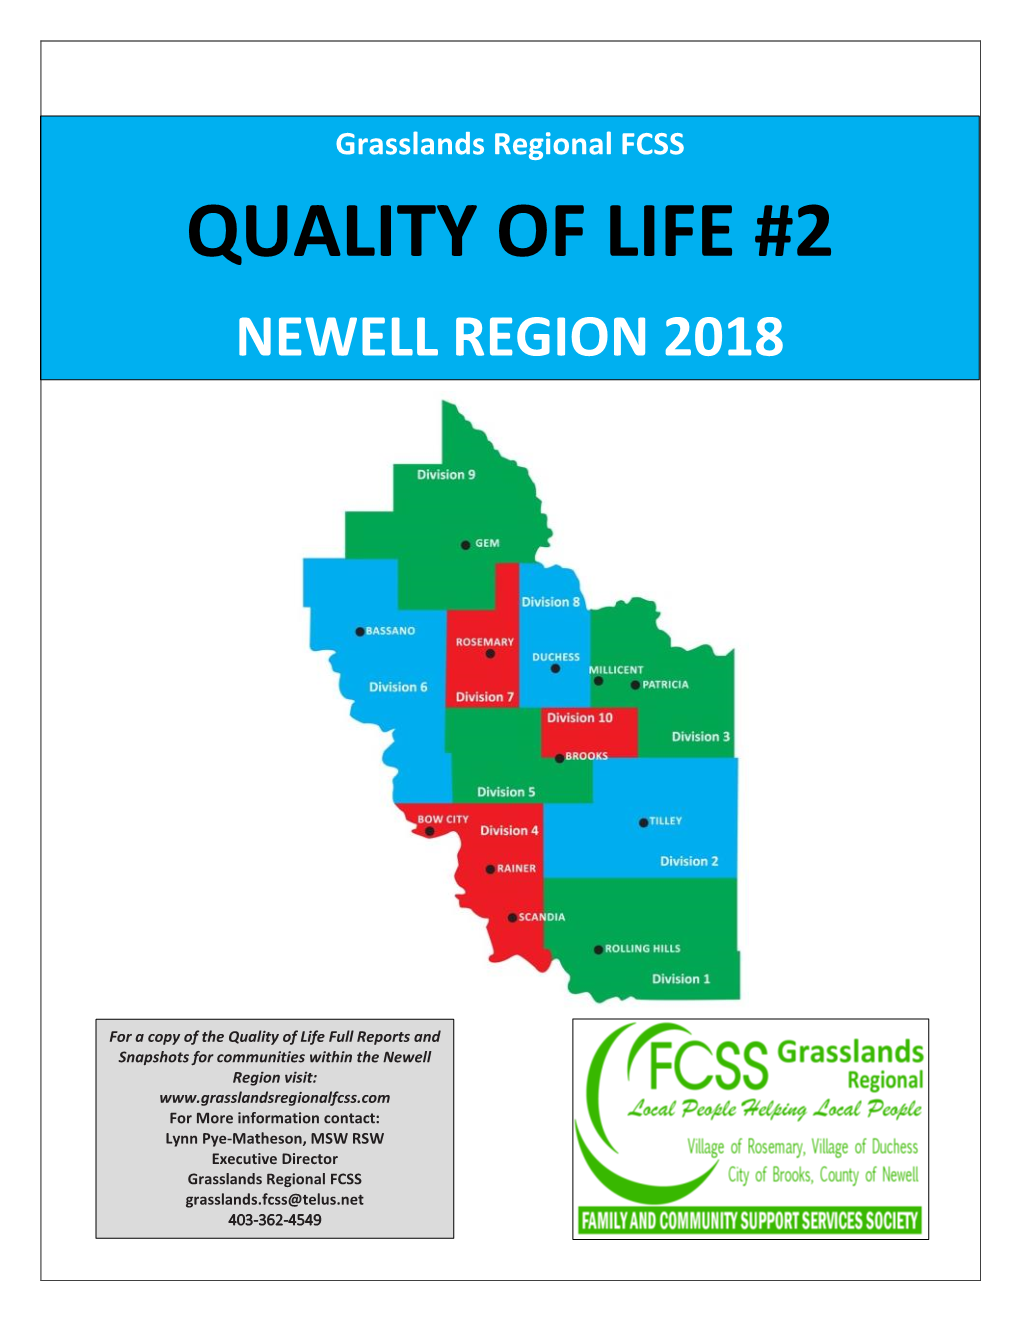 Newell Region 2018 Quality of Life Report